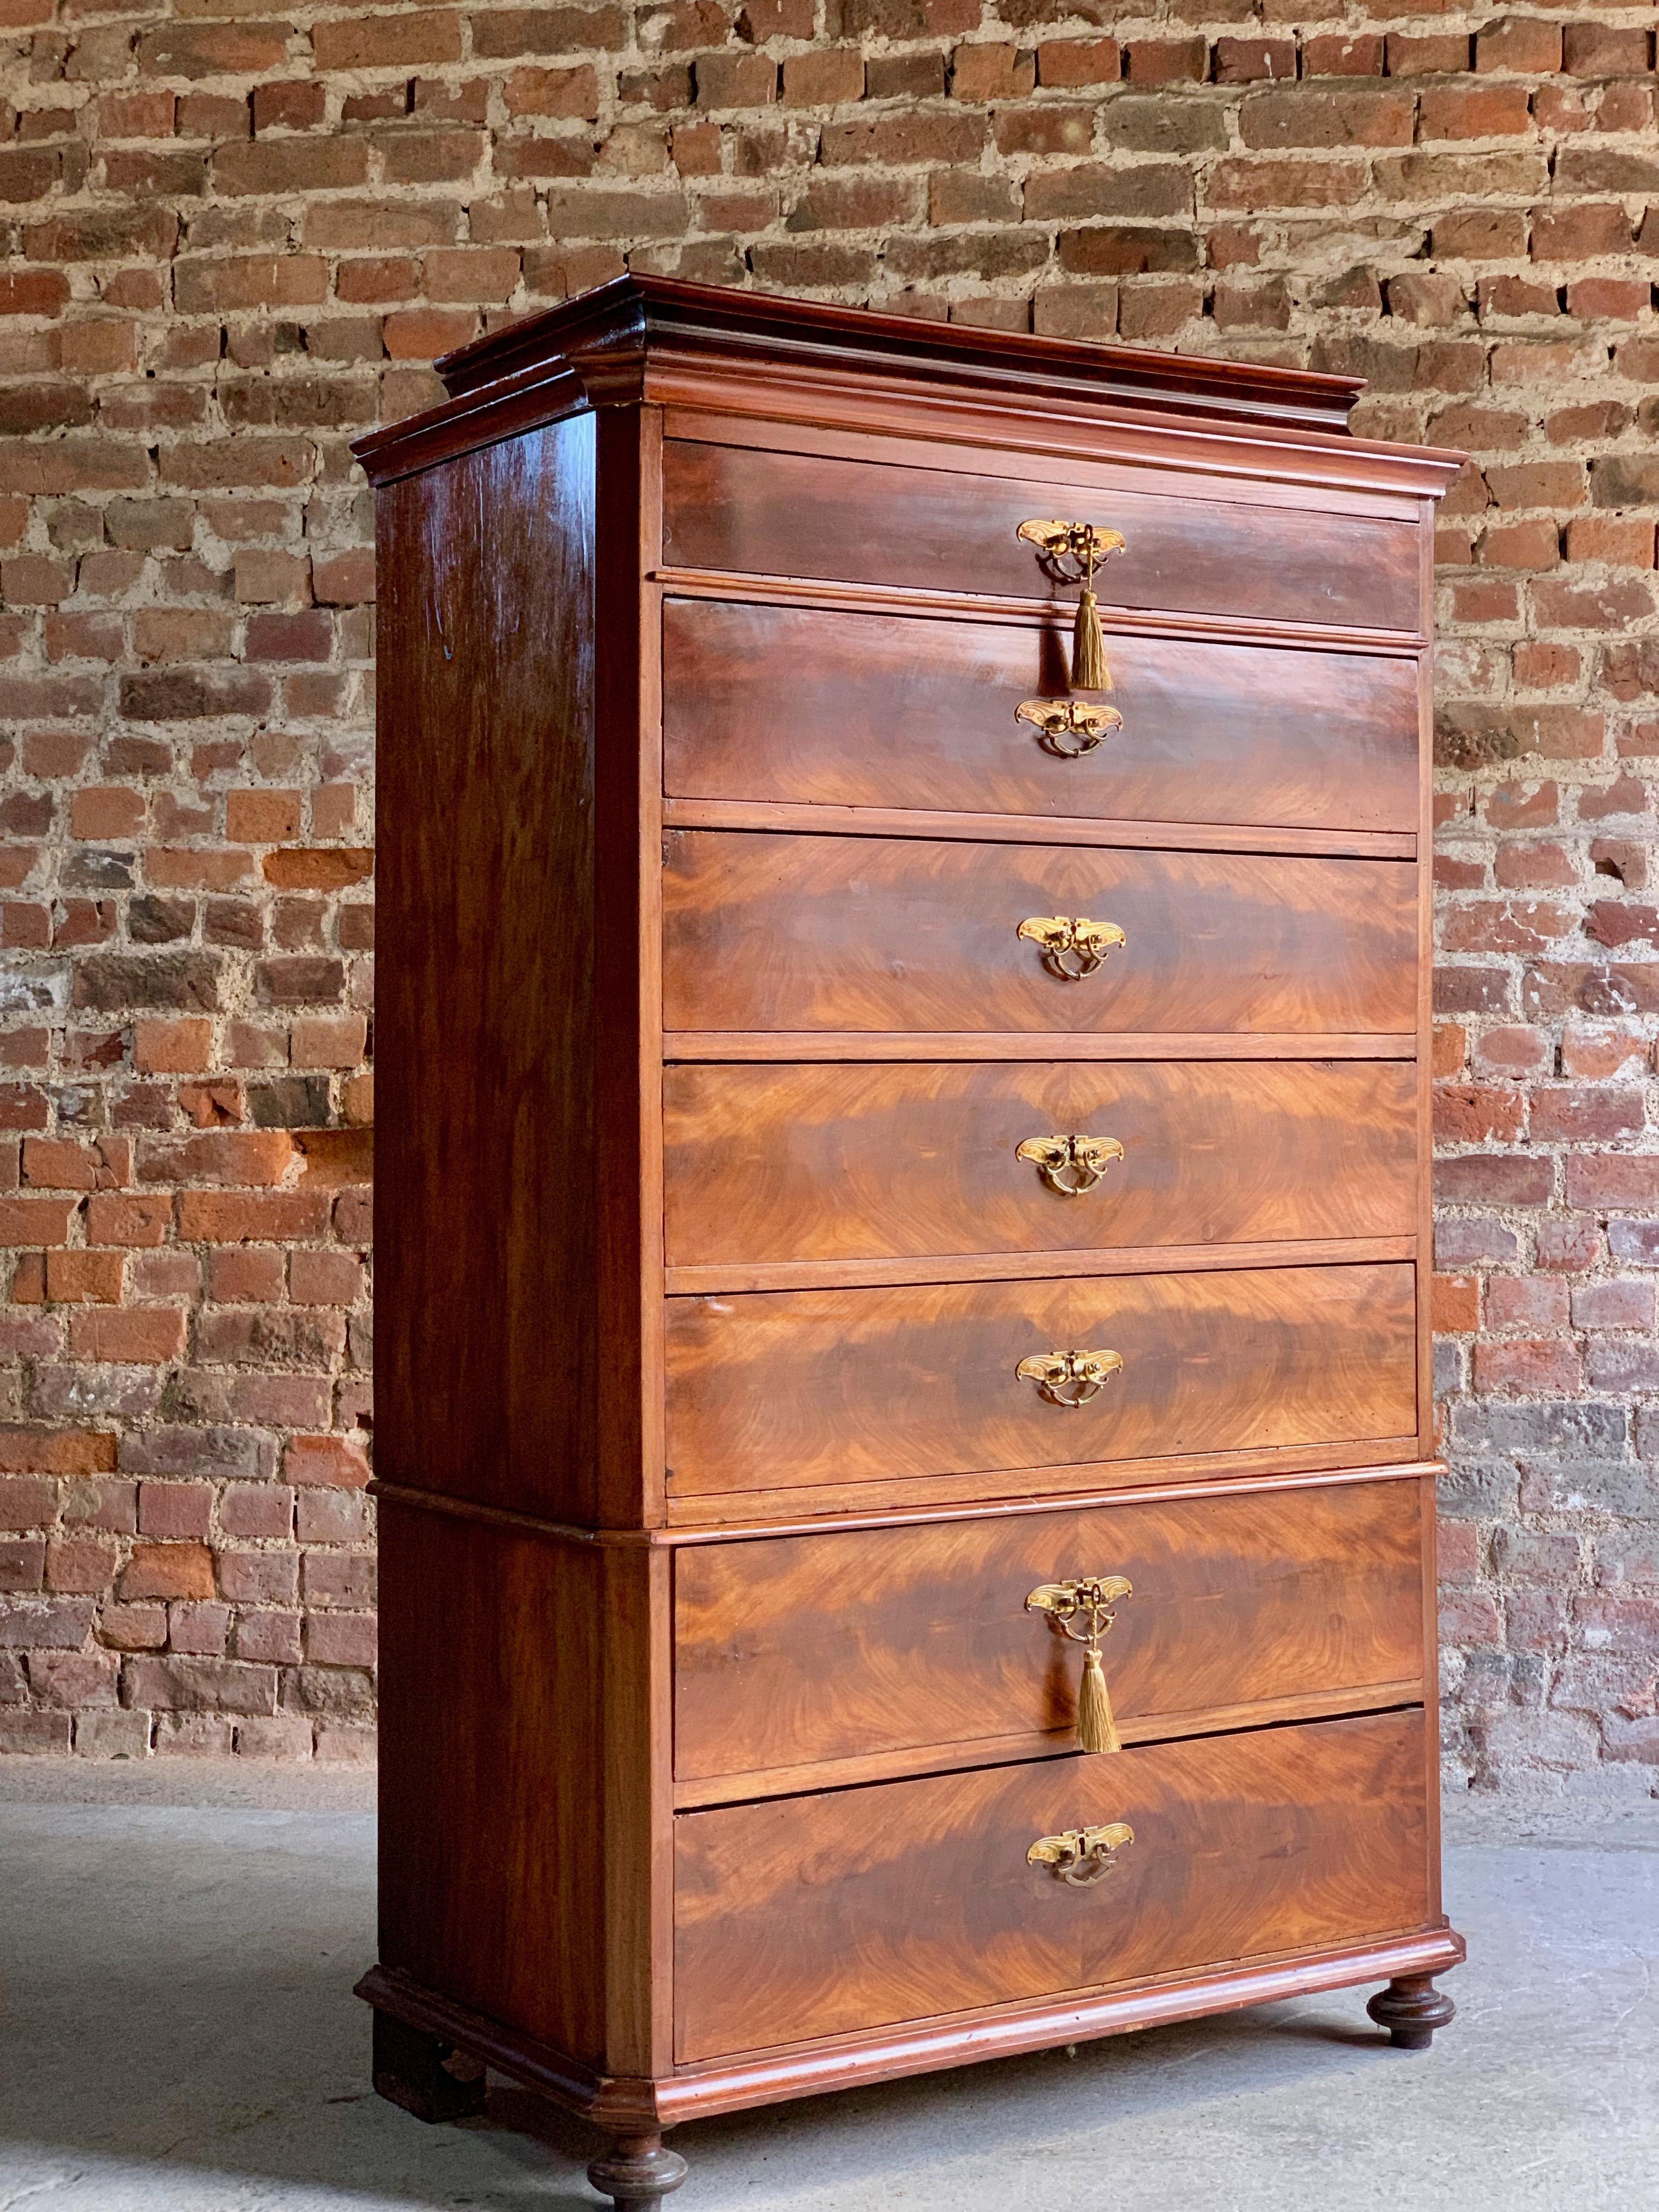 Antique mahogany tallboy chest of drawers 19th century Danish Biedermeier style.

Magnificent antique 19th century Danish flame fronted mahogany tallboy chest of drawers in the Biedermeier style circa 1880, the canted top over seven graduated